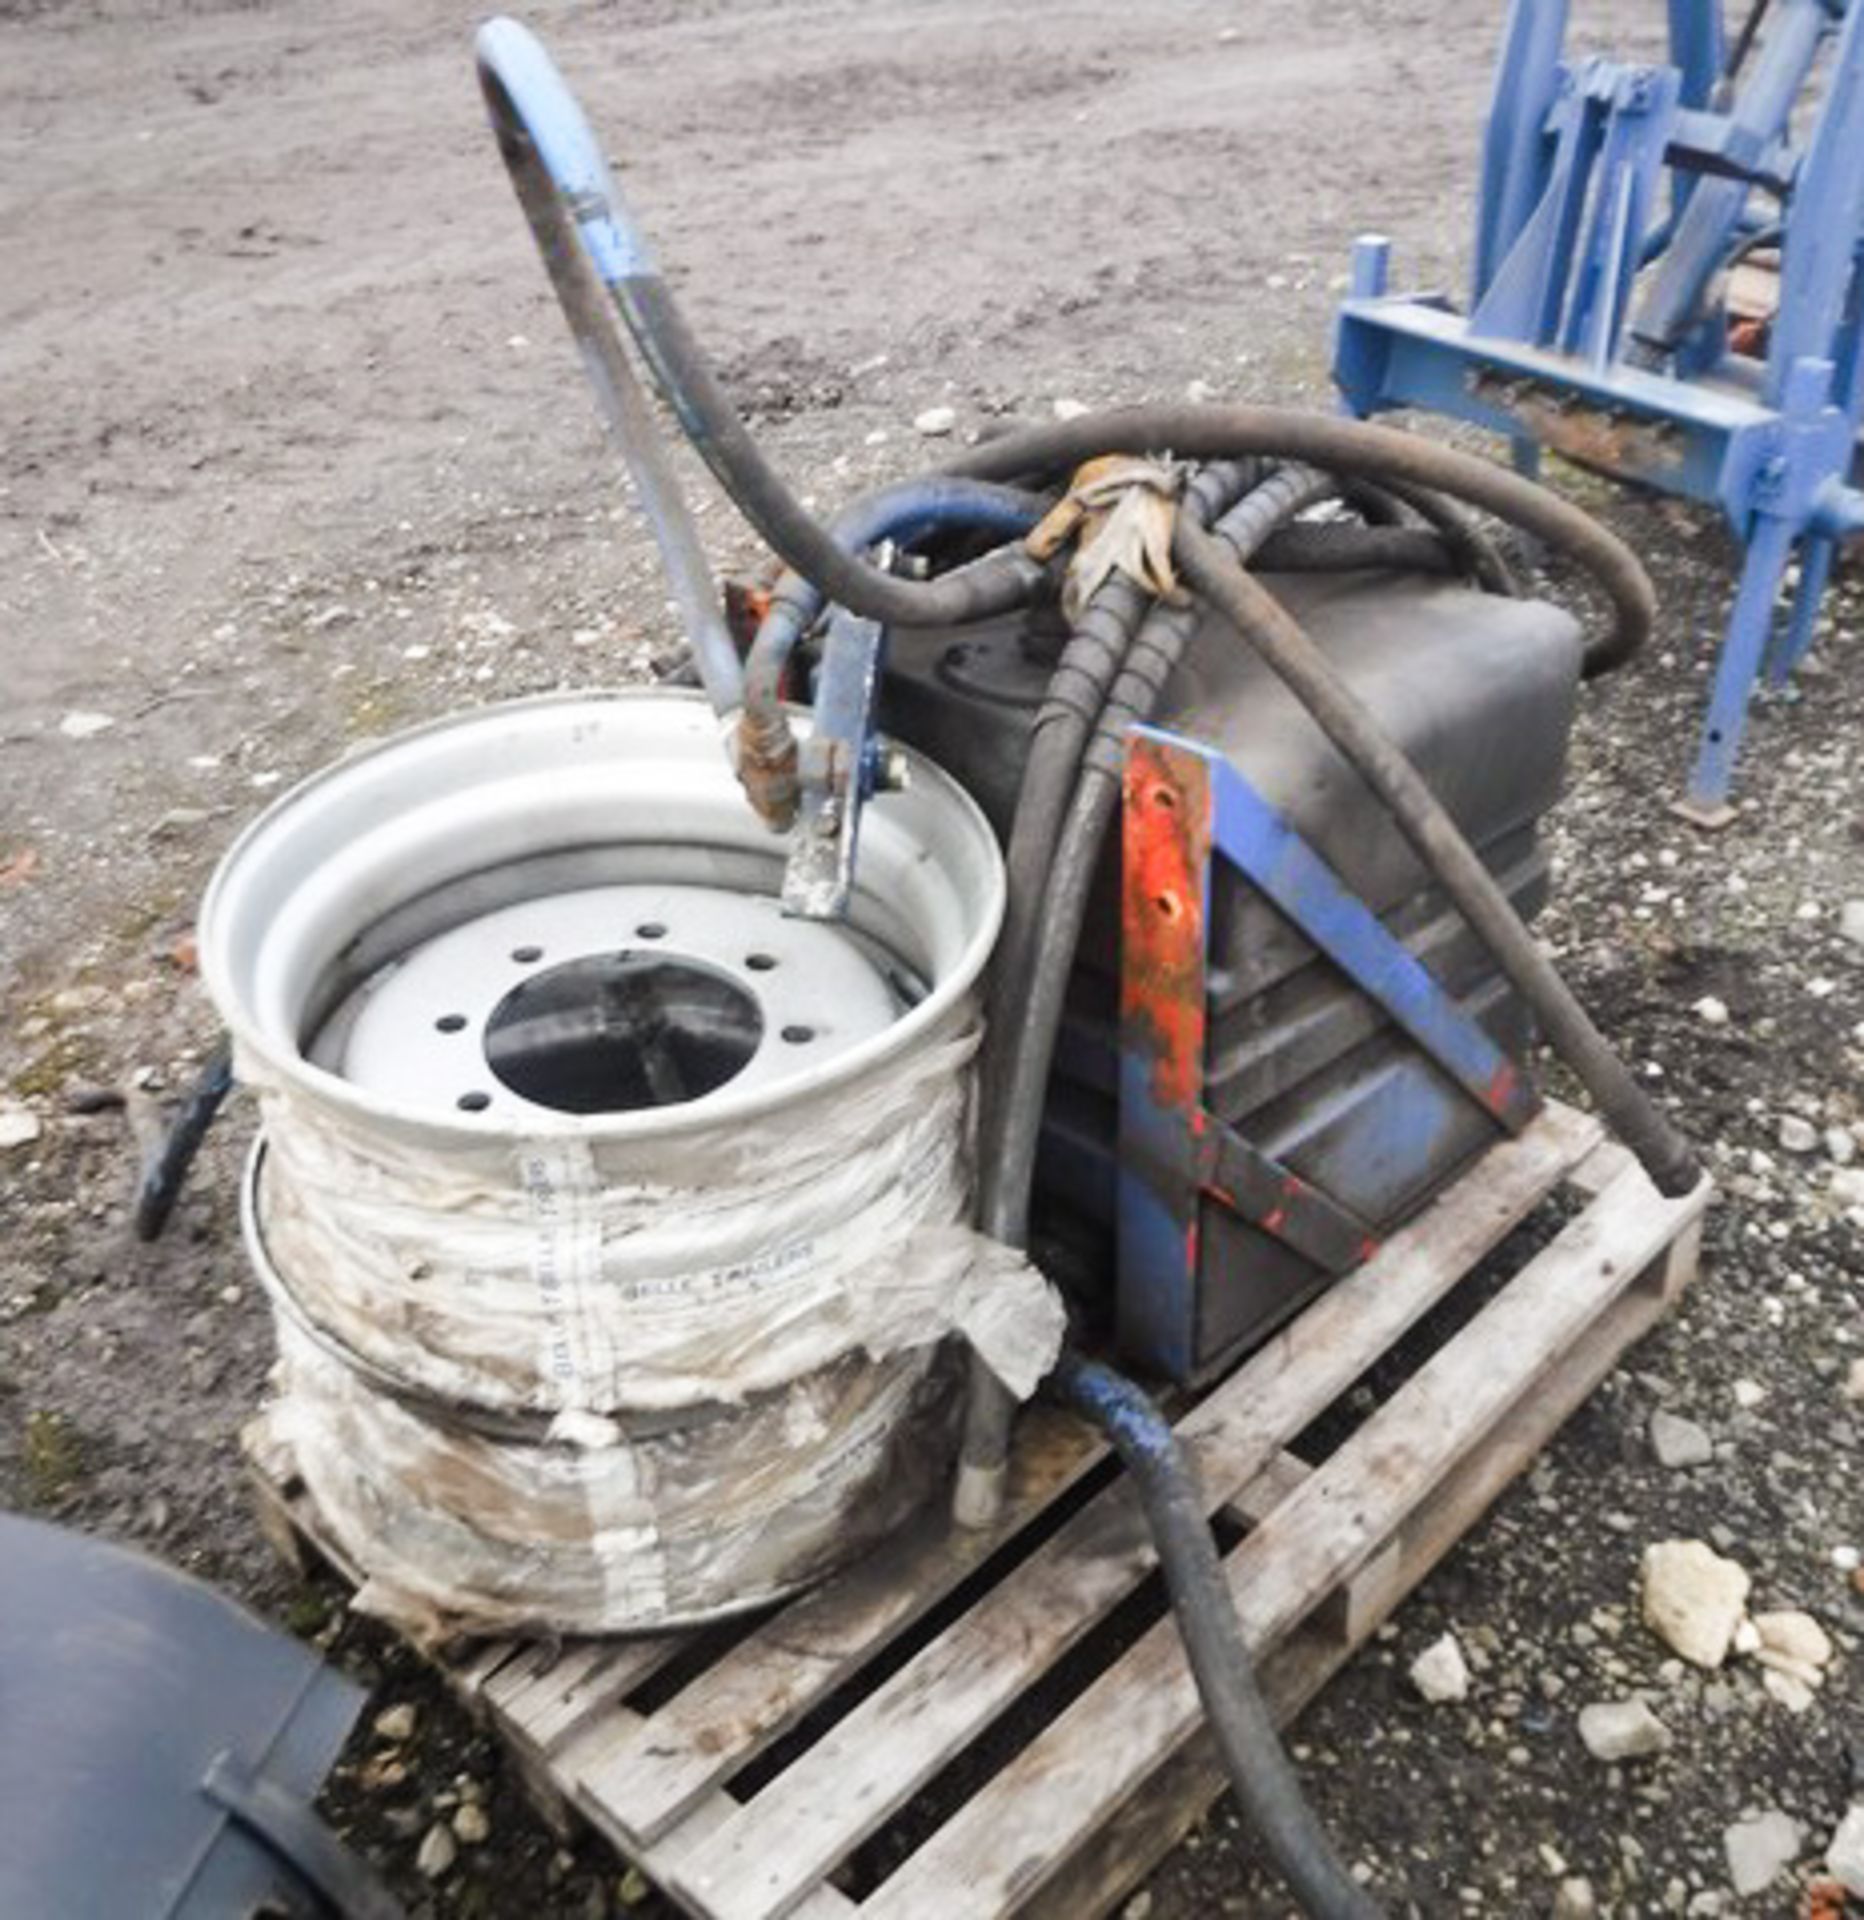 2 TRUCK WHEELS, WHEEL MOUNTING PLATES, MISC TRUCK SPARES & HYDRAULIC TANK ON PALLET